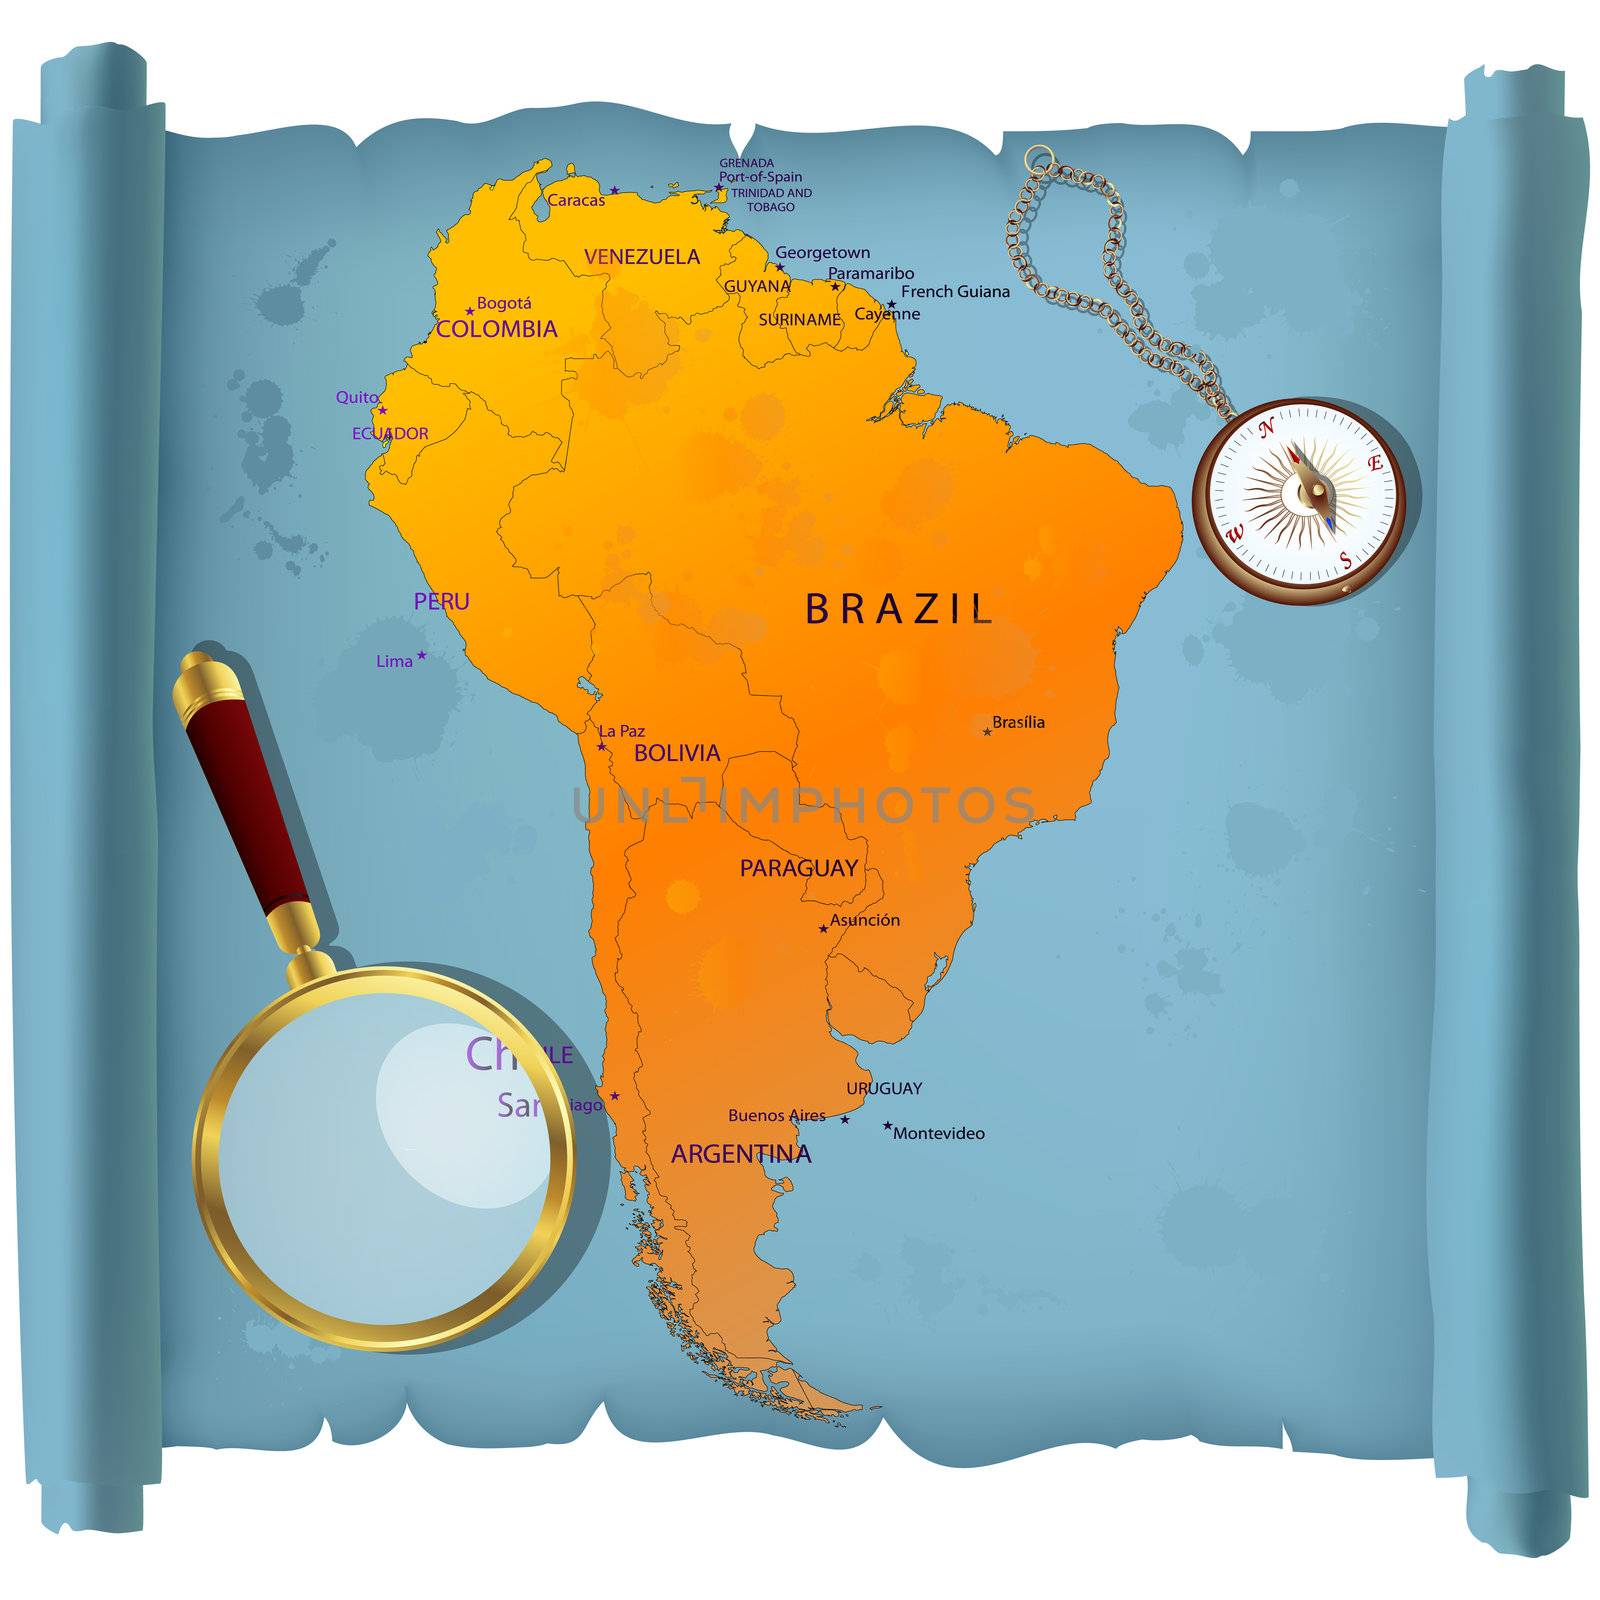 South America map on a roll by Lirch